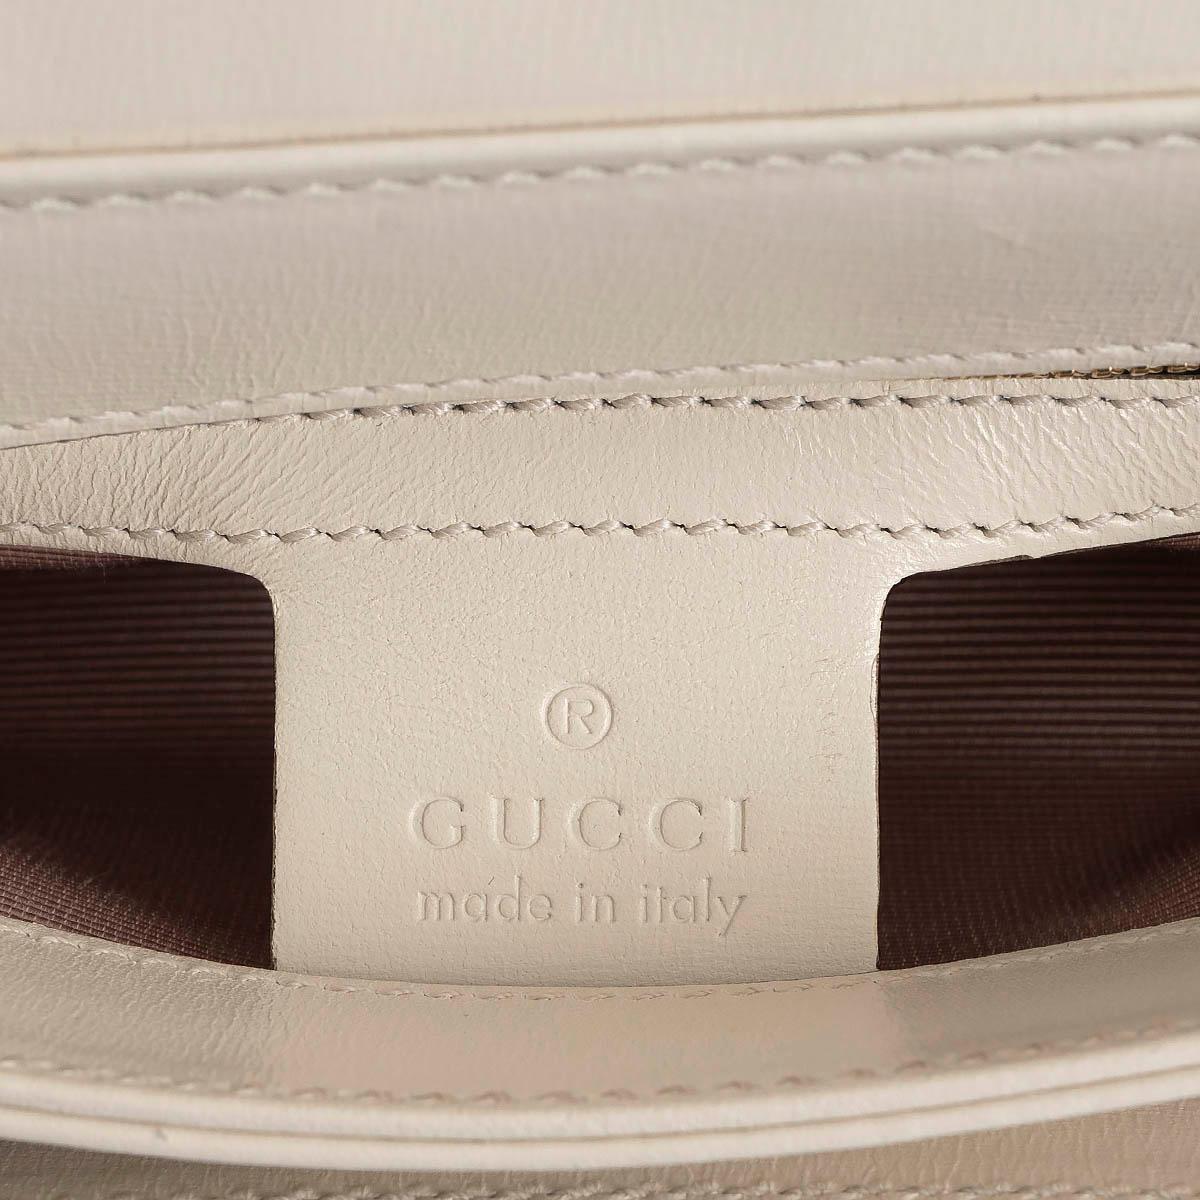 GUCCI white leather 2019 ARLI SMALL Shoulder Bag For Sale 3